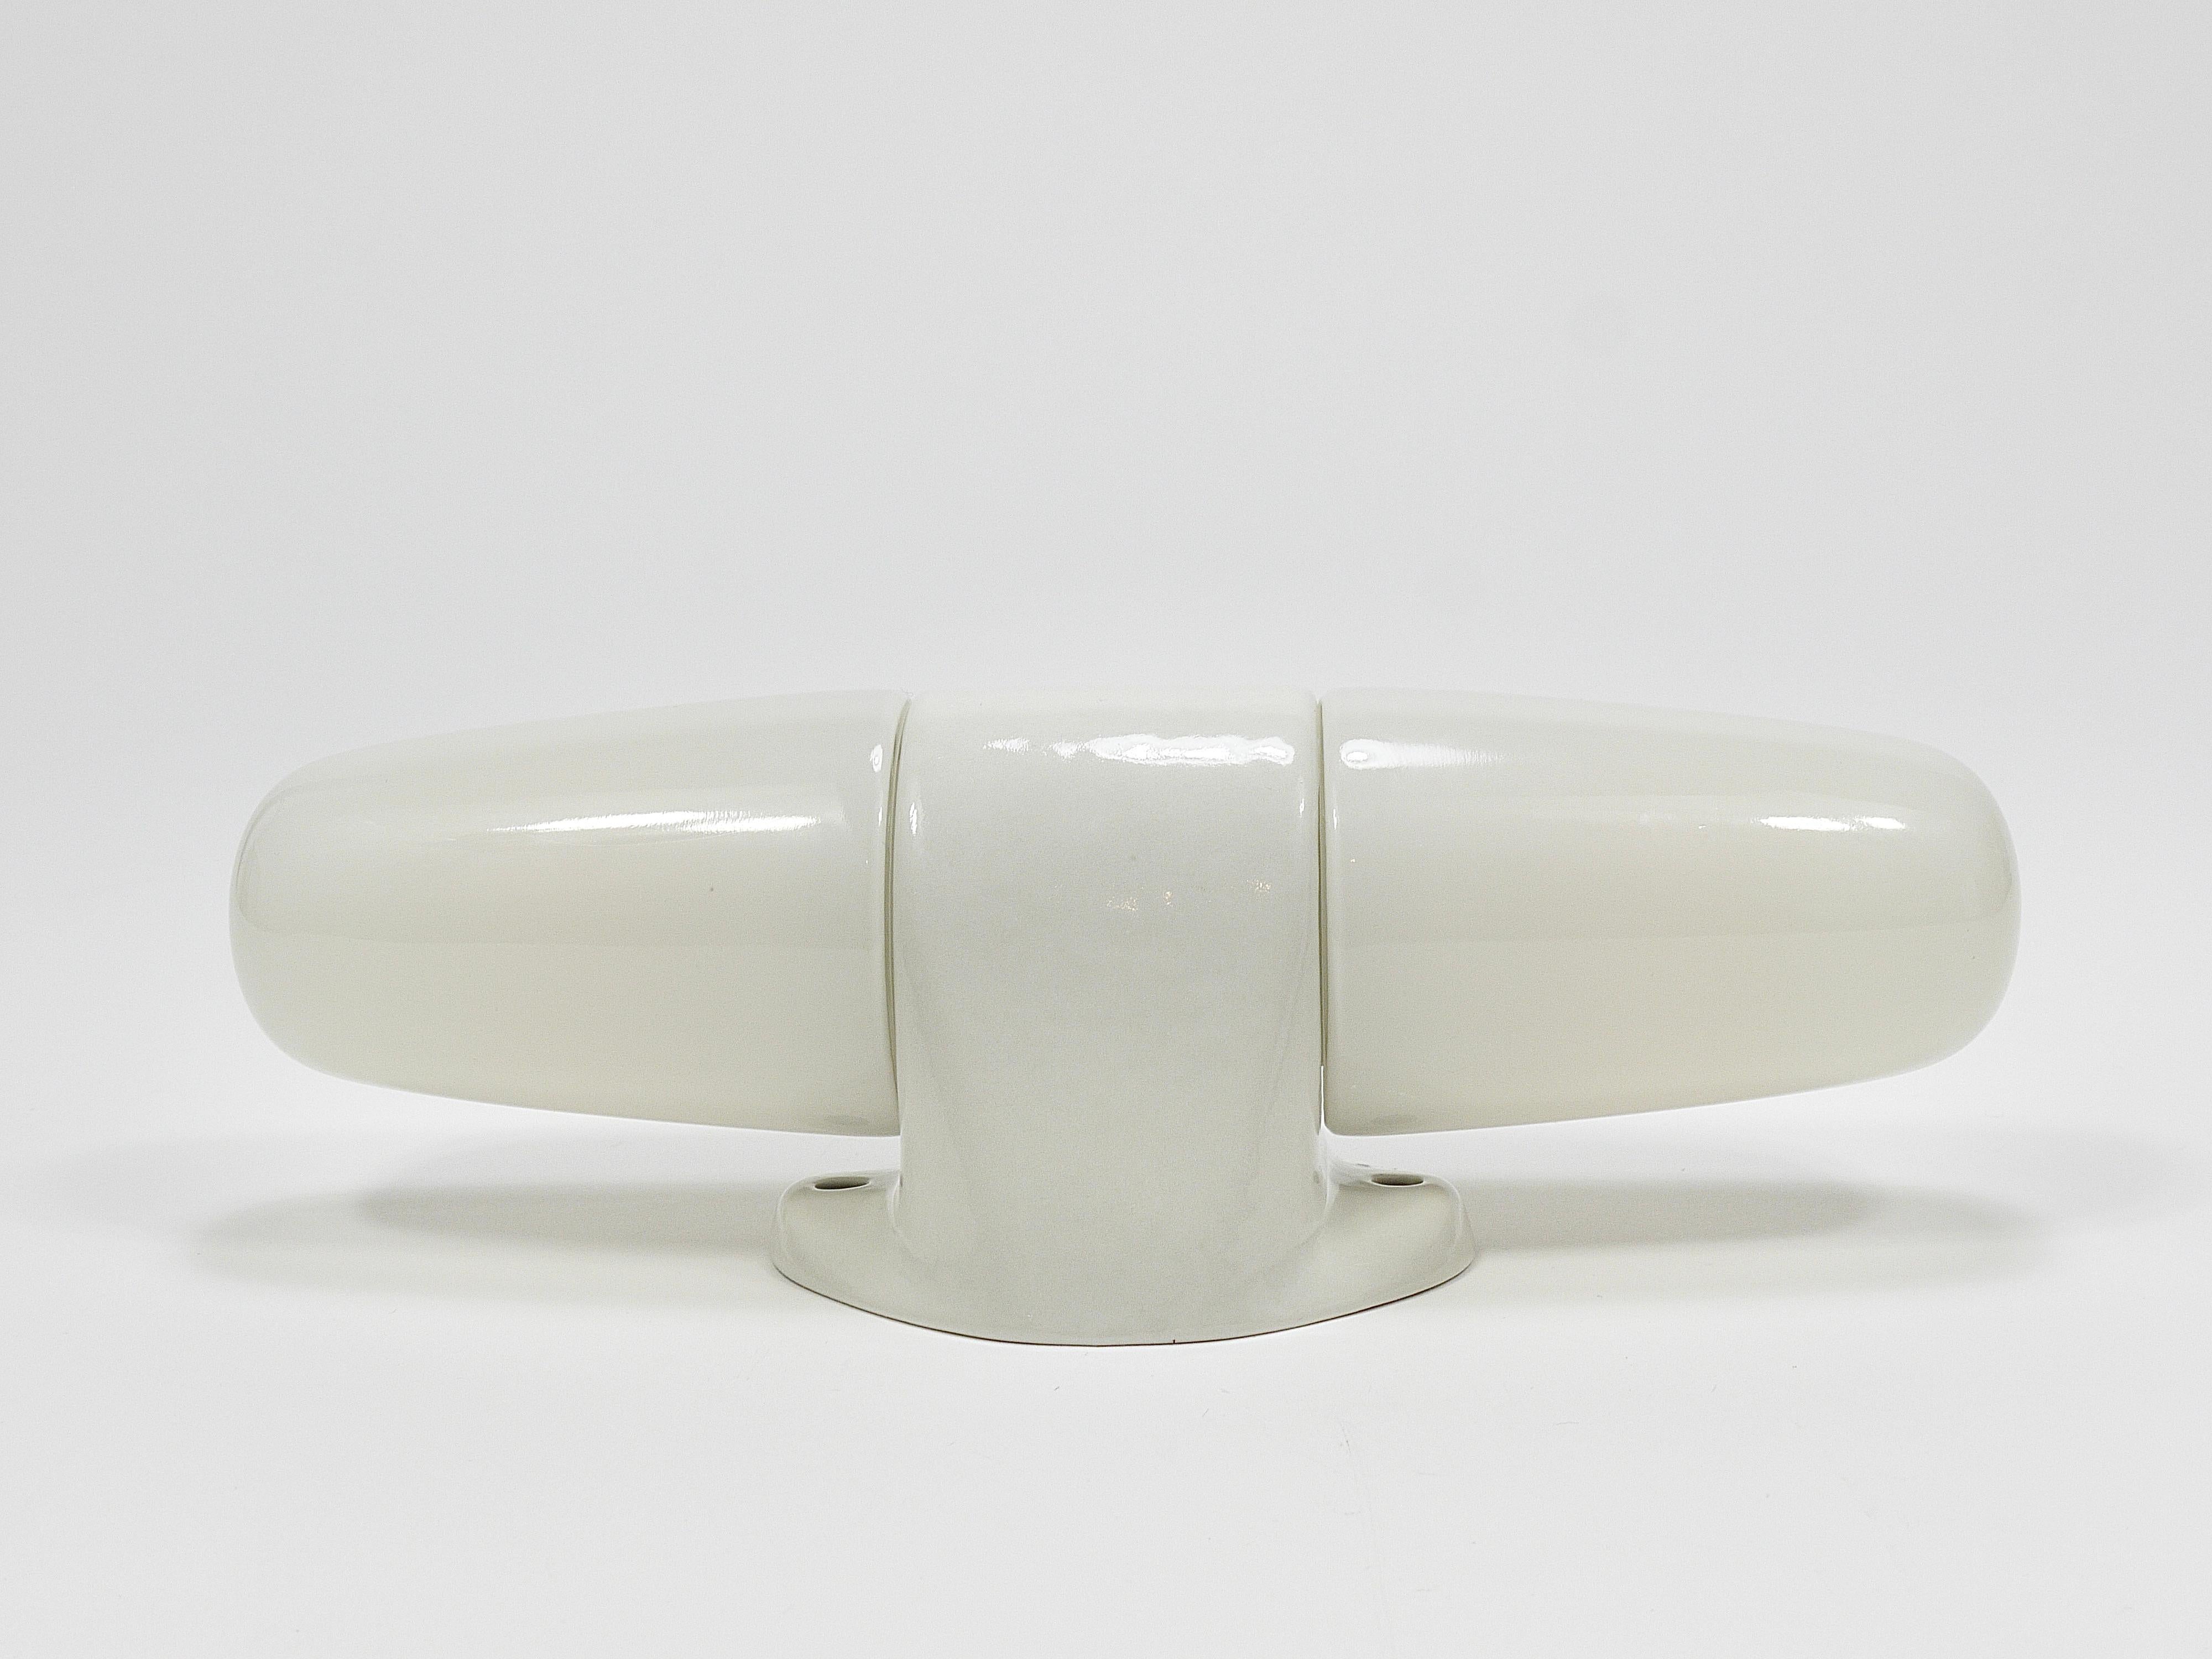 Wilhelm Wagenfeld Bauhaus Sconce / Double Wall Light by Linder Germany, 1950s For Sale 10